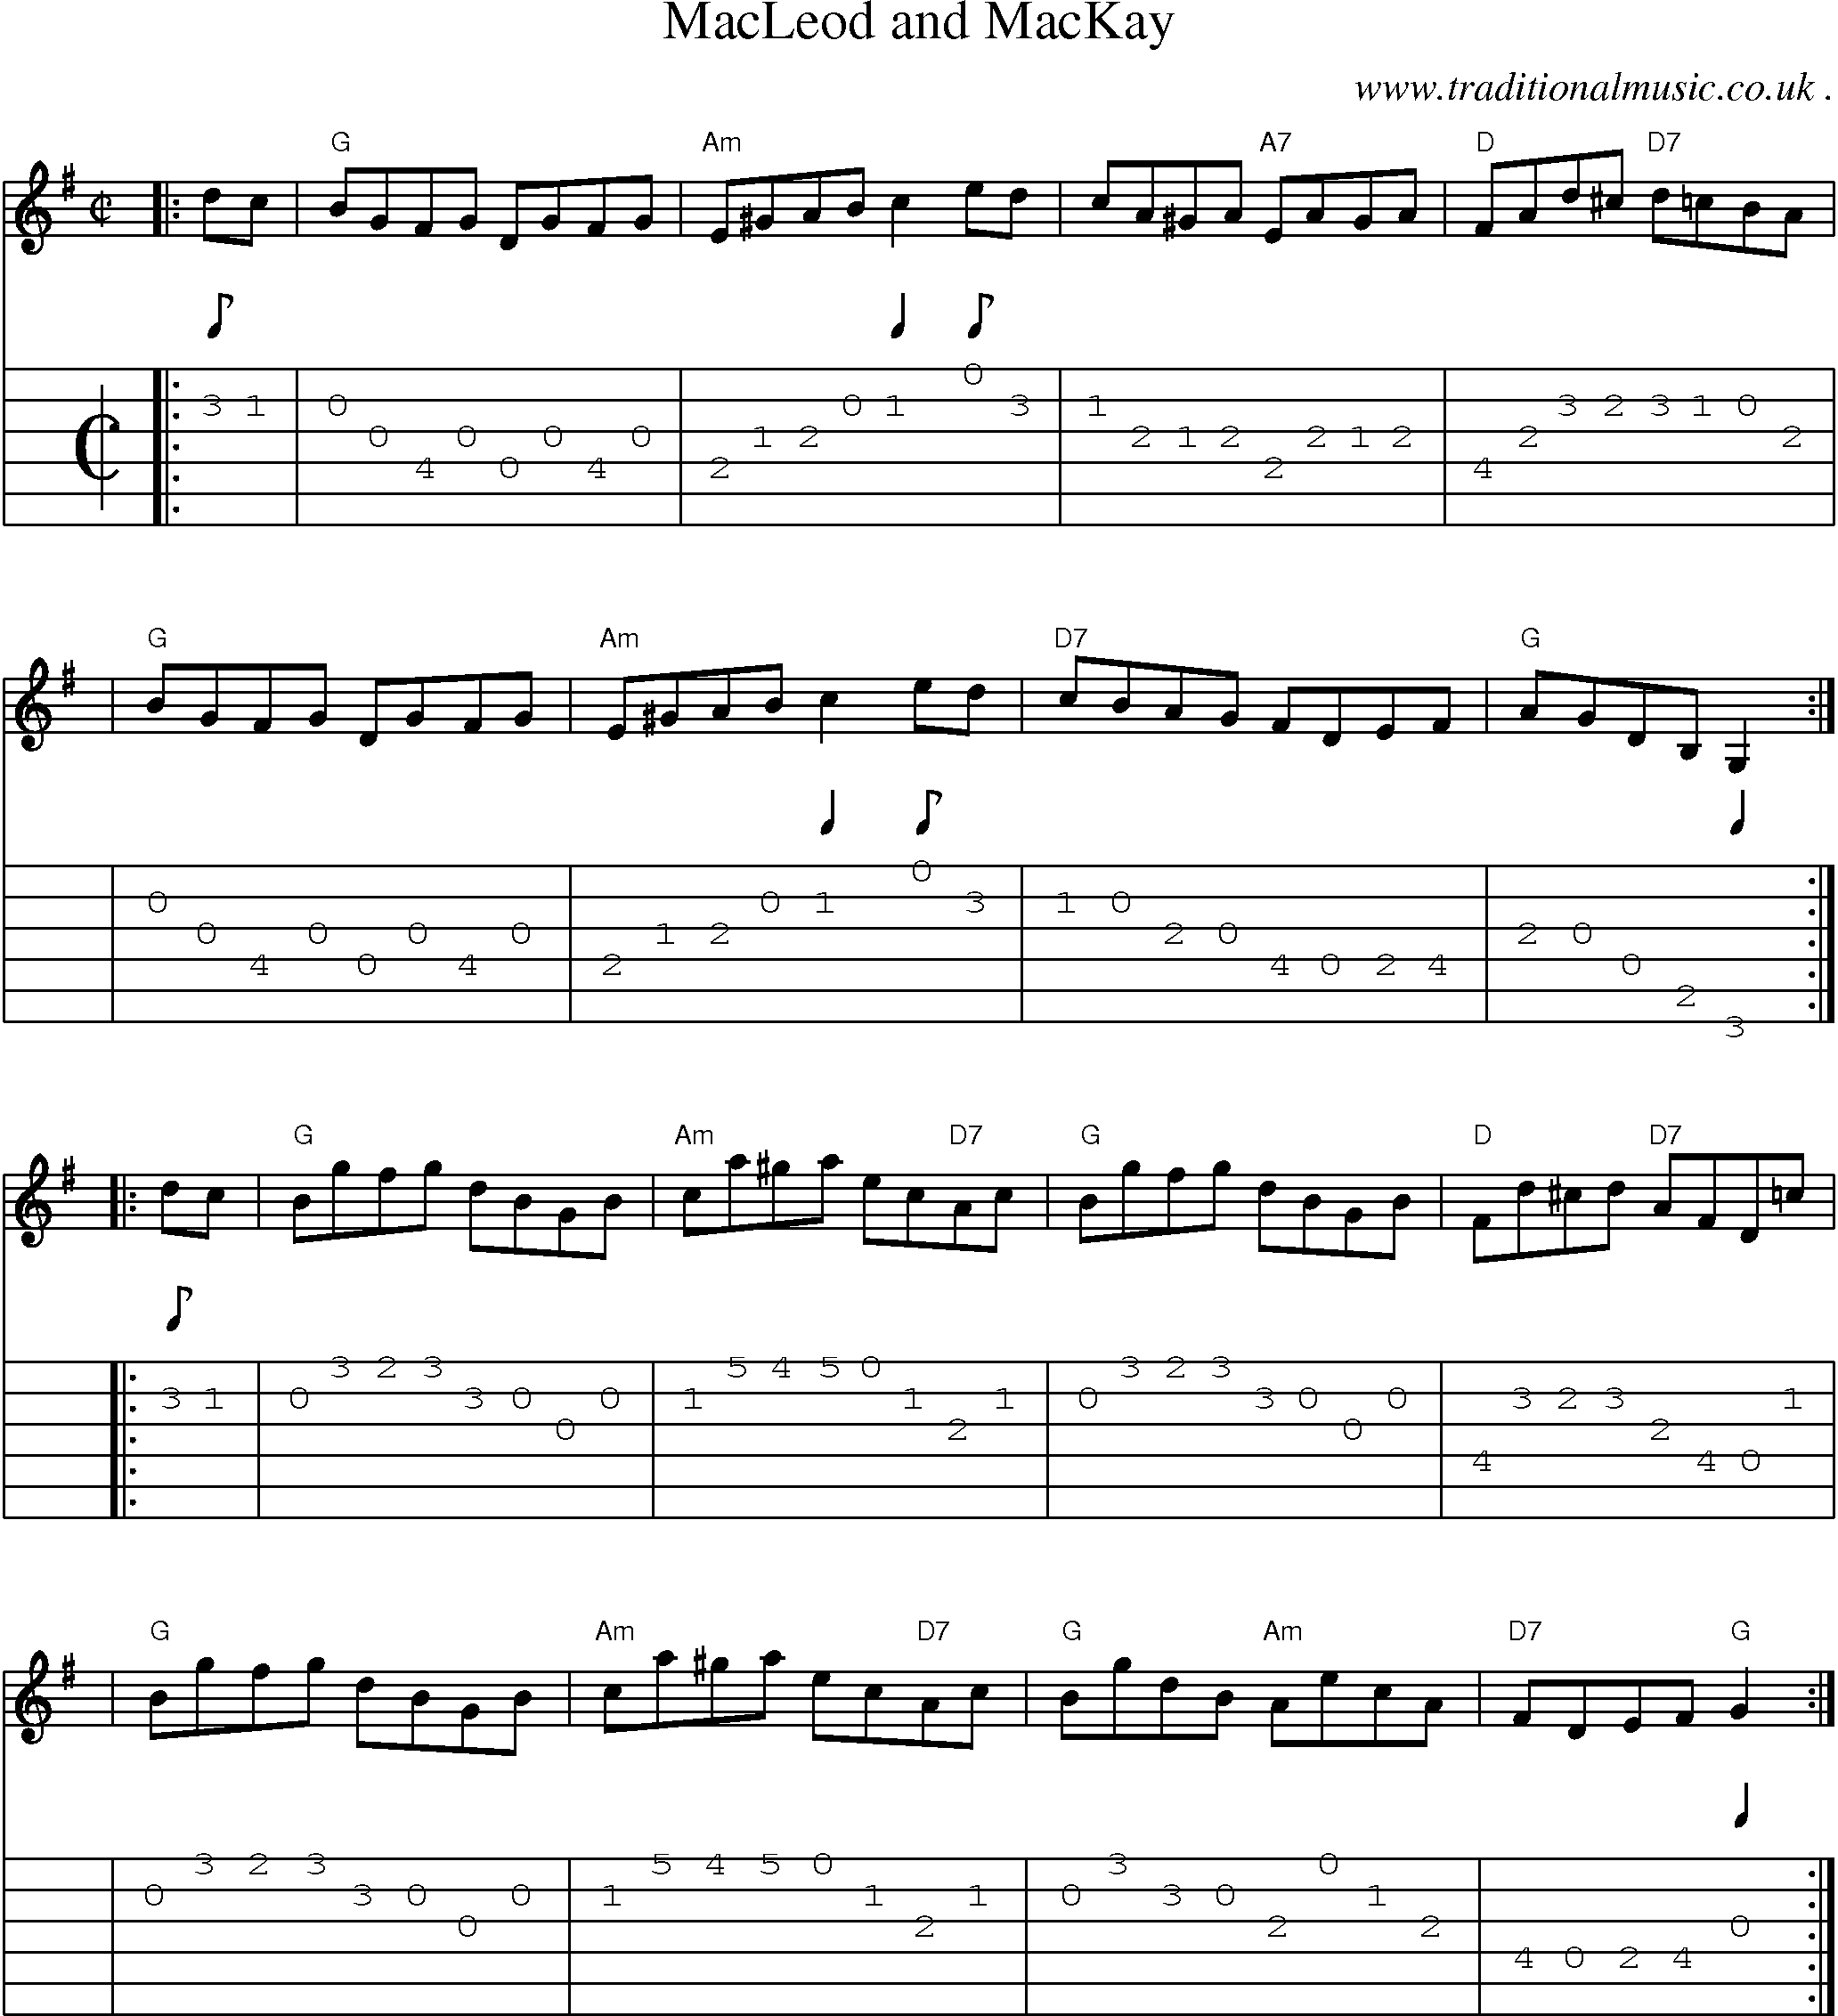 Sheet-music  score, Chords and Guitar Tabs for Macleod And Mackay